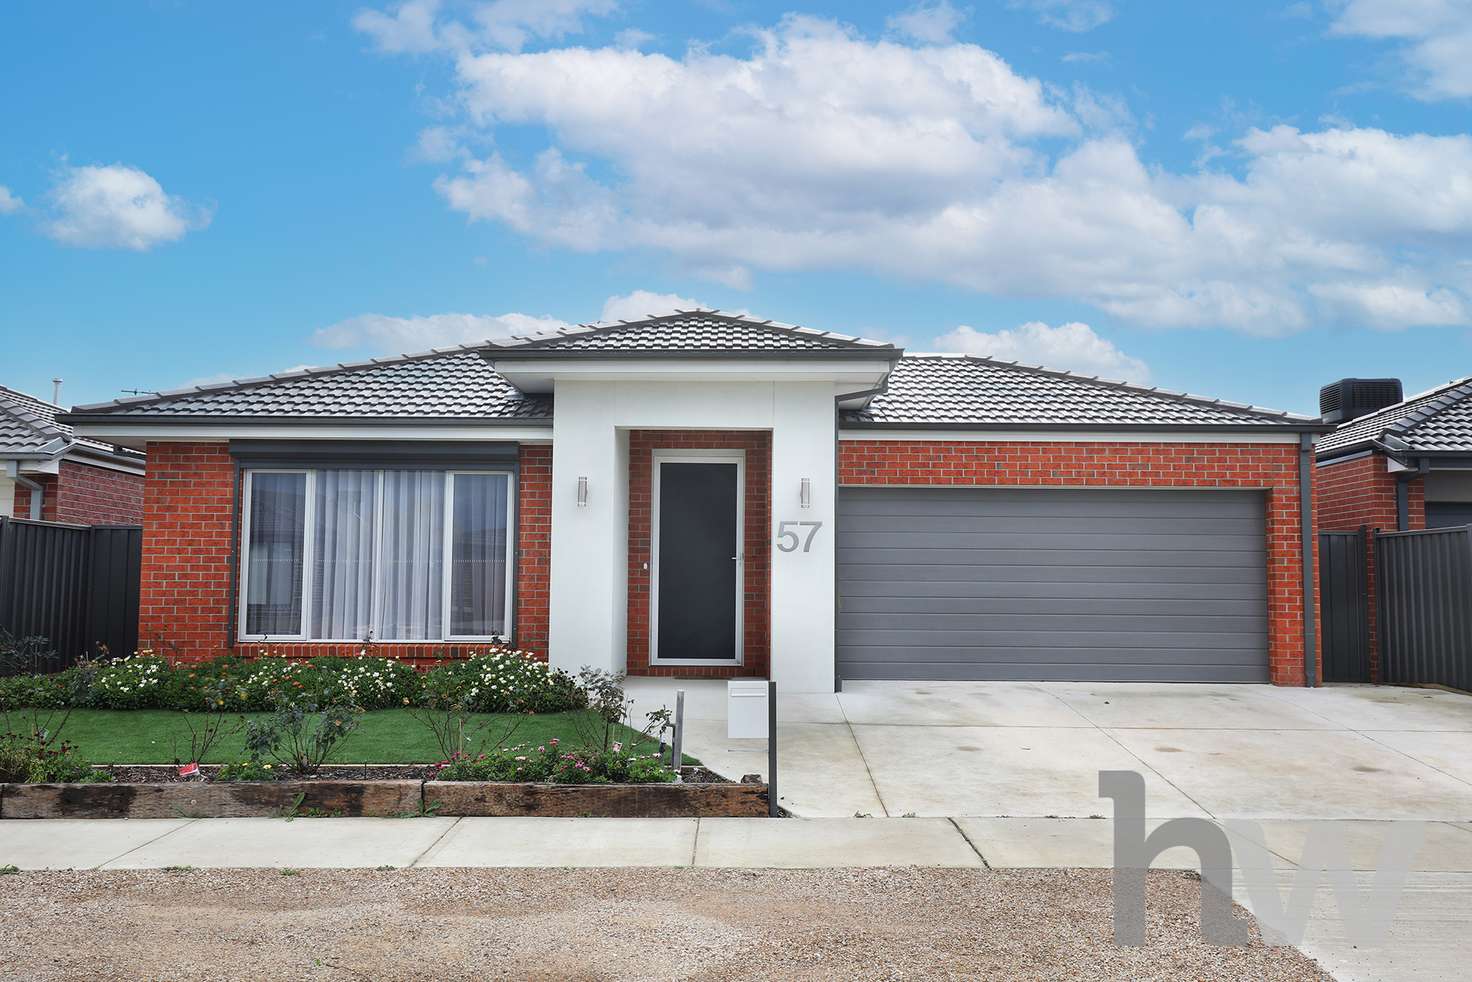 Main view of Homely house listing, 57 Pelican Way, Lara VIC 3212